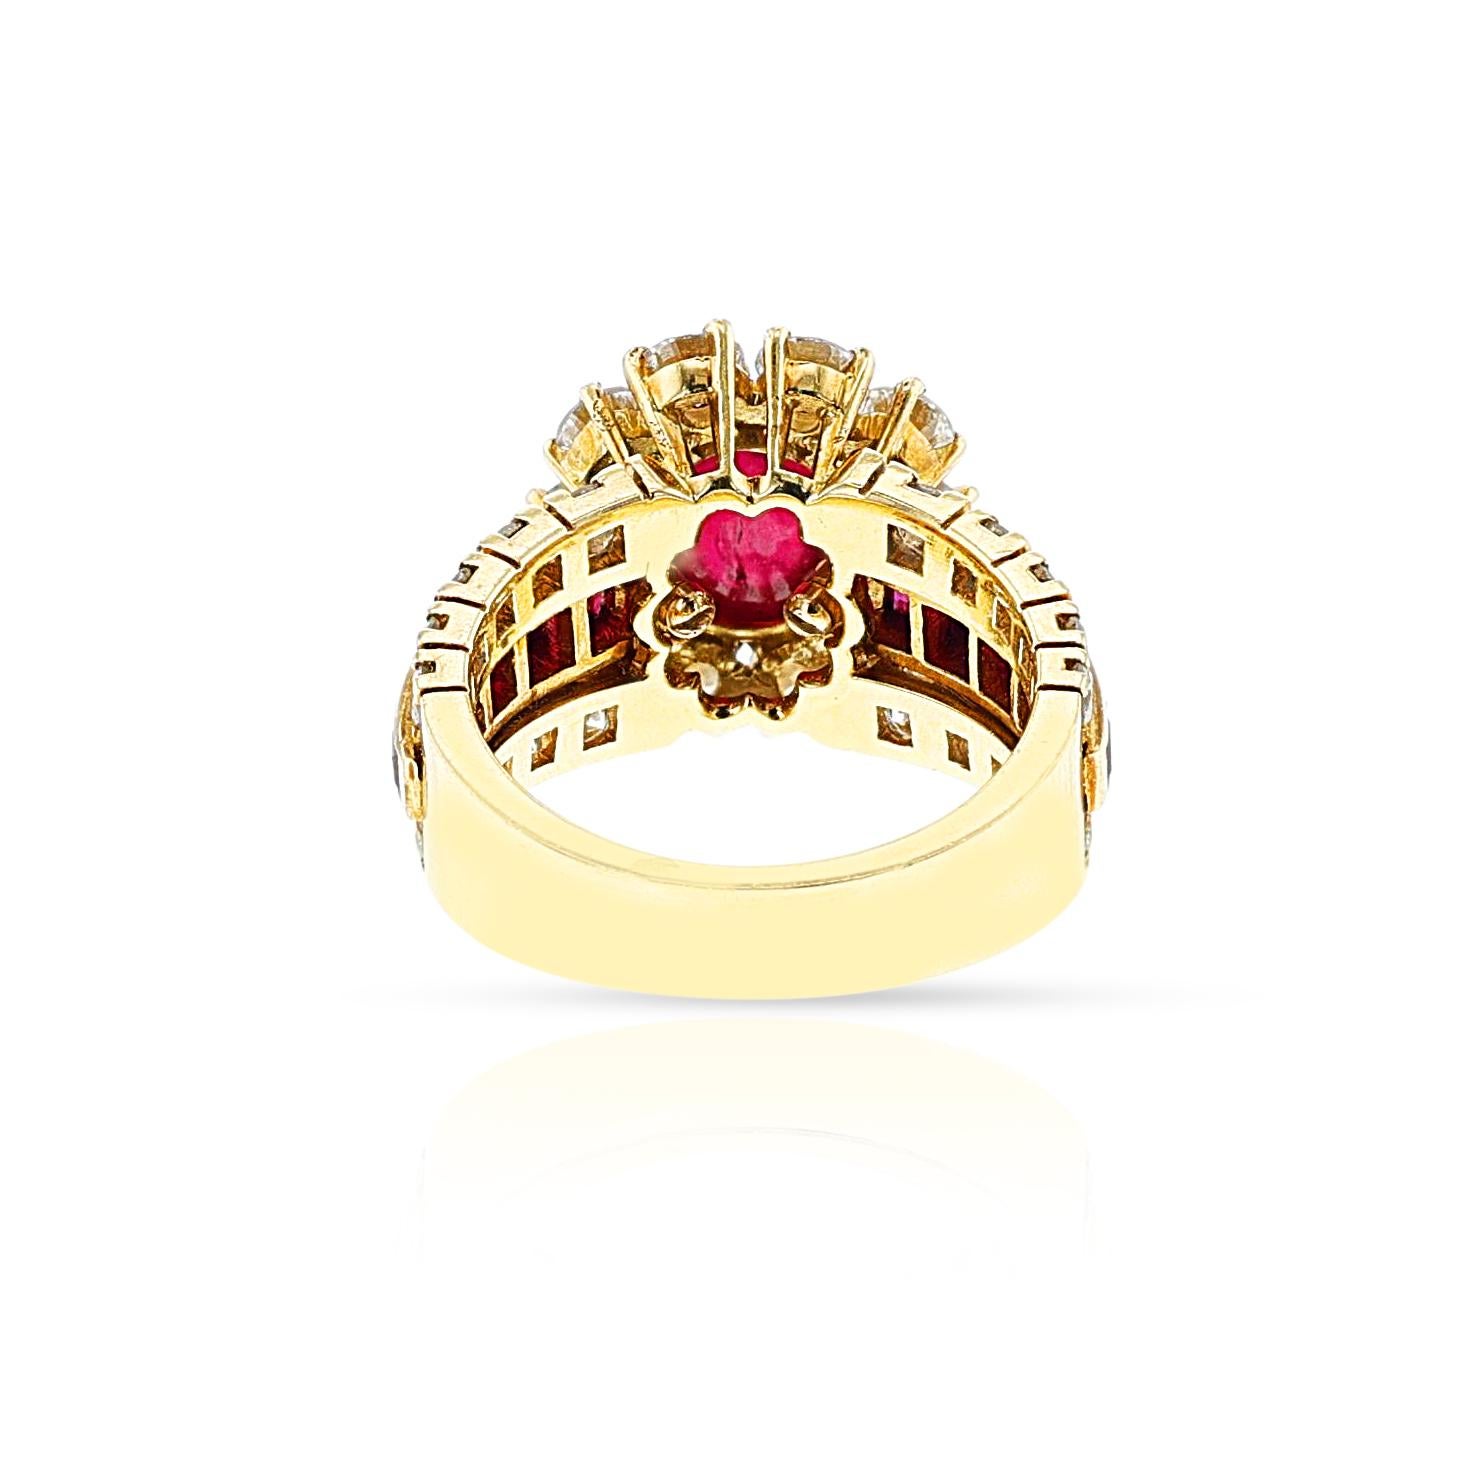 Van Cleef & Arpels Ruby Cabochon and Diamond Ring, 18k For Sale 4